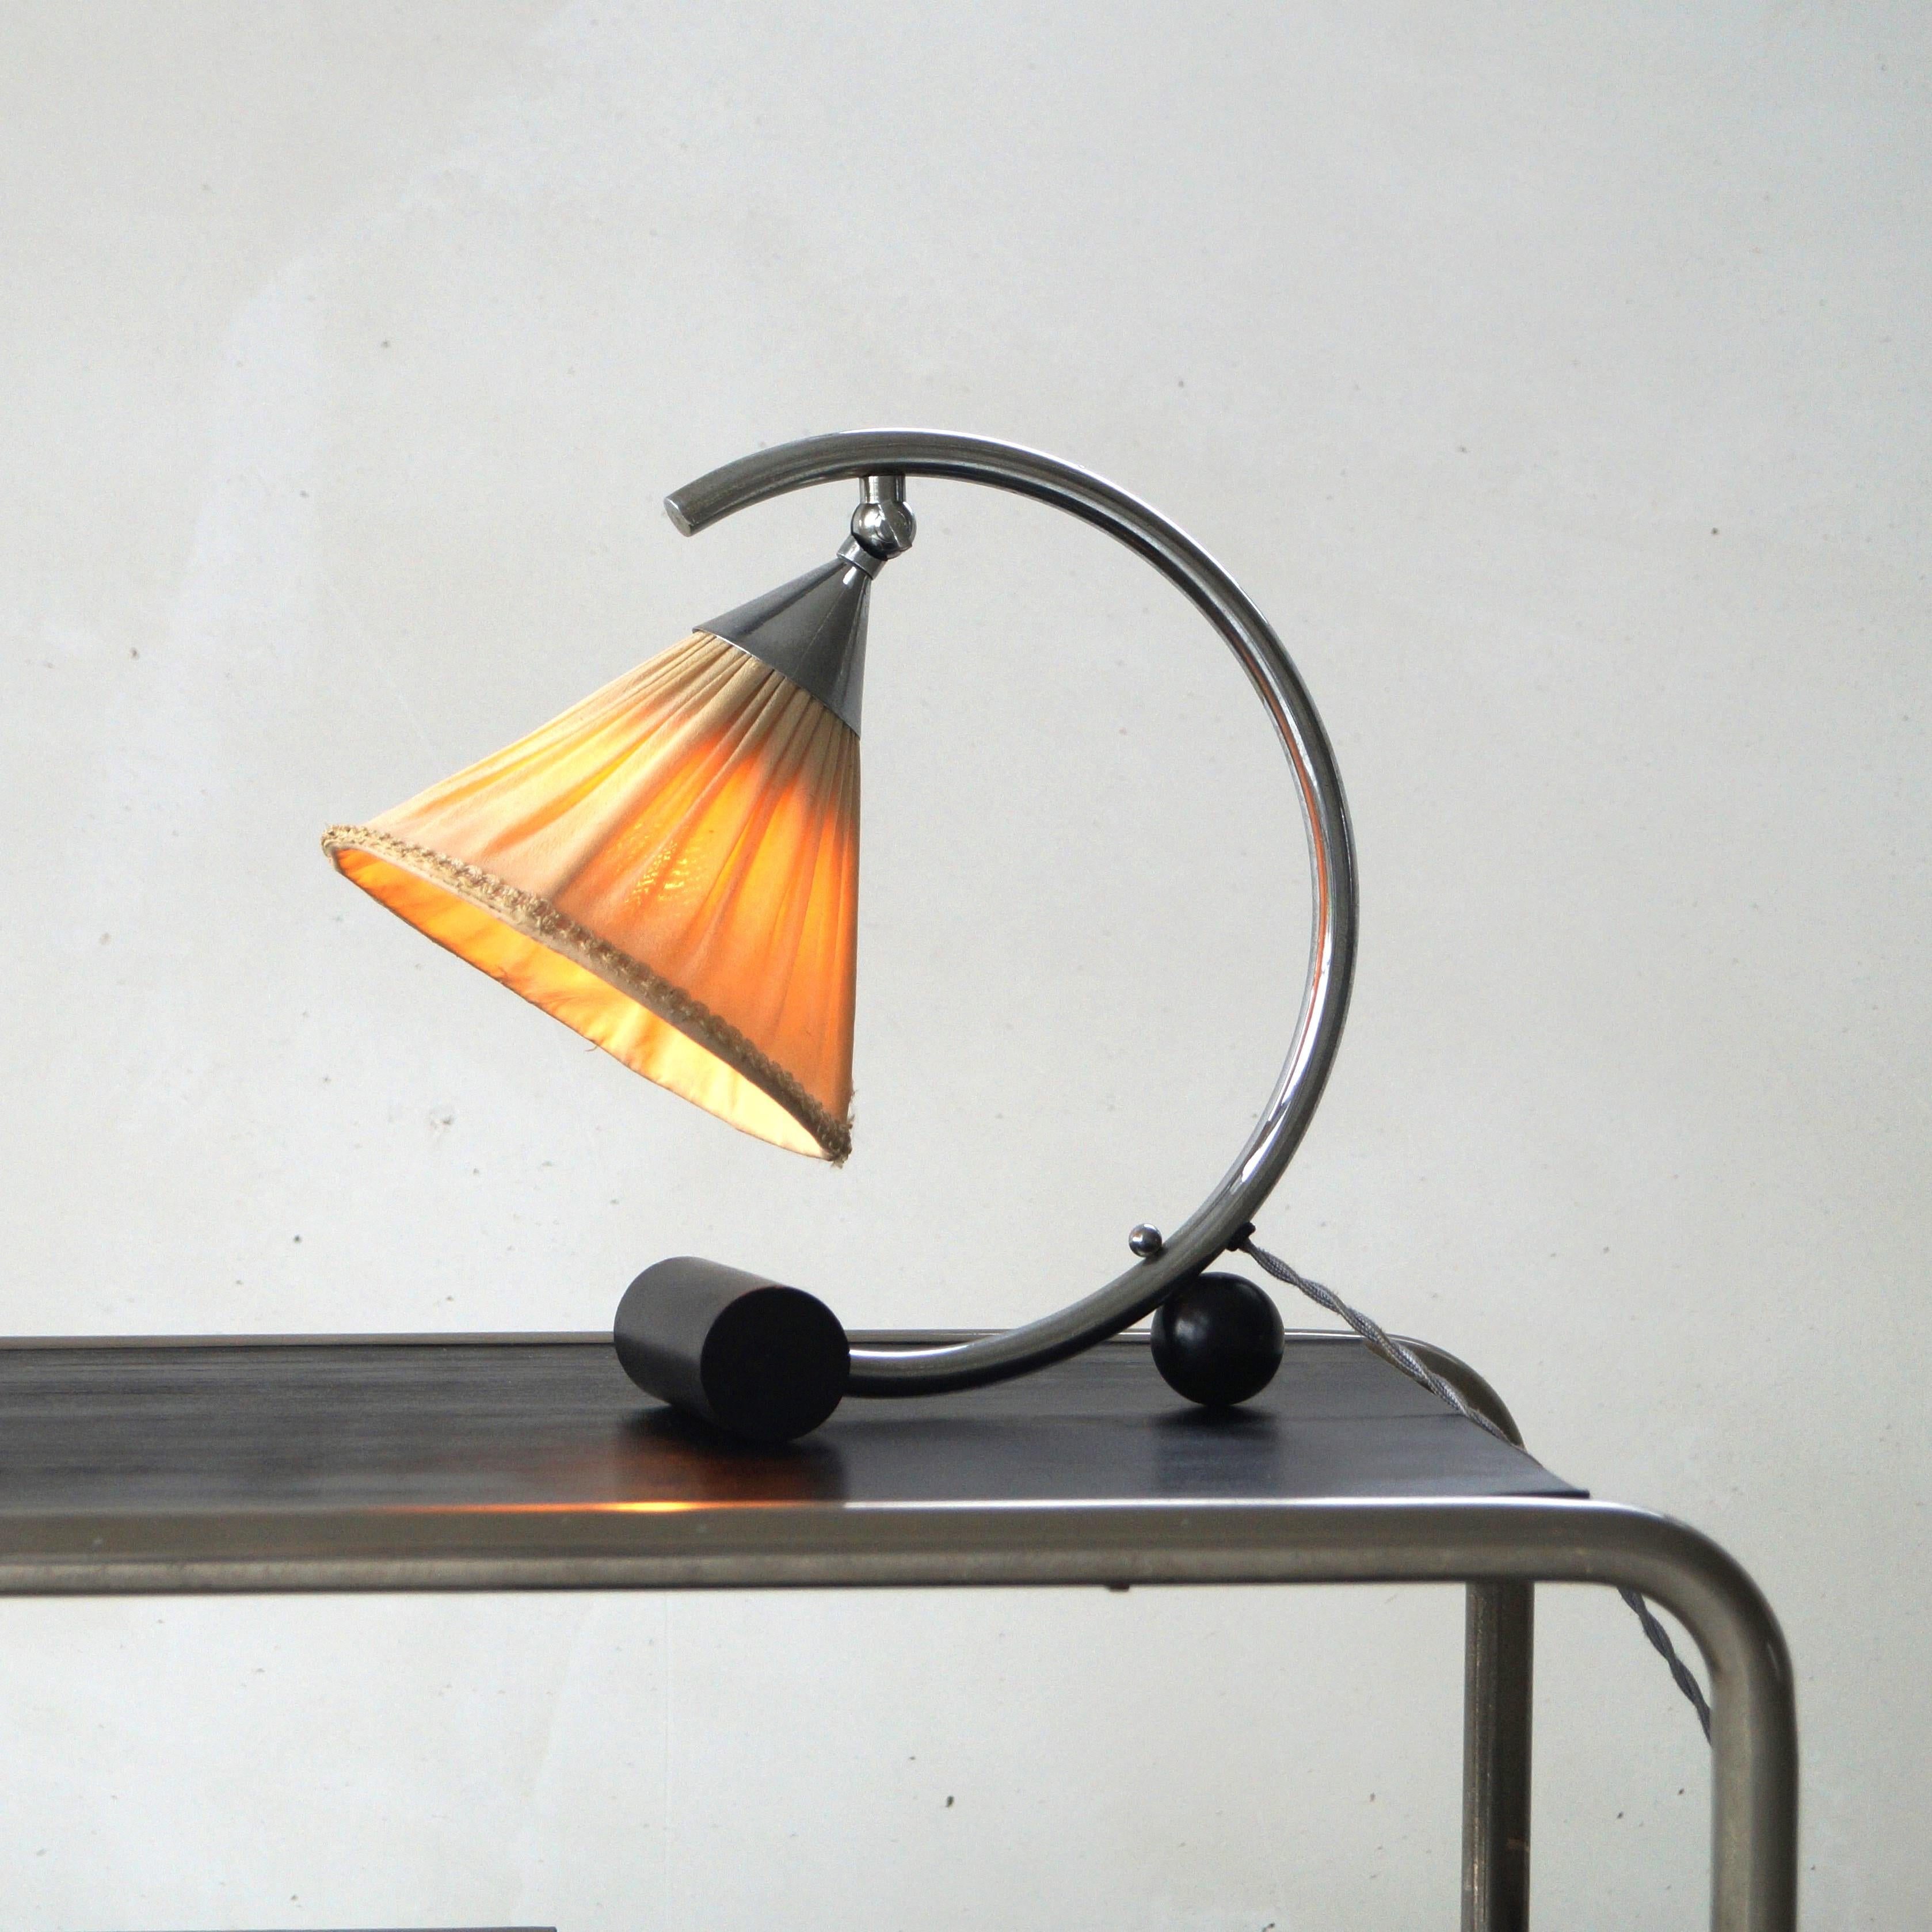 A rare 1930s modernist table lamp or bedside lamp with an extraordinary design and its original lampshade which is in fair condition regarding its age. Ideal to be used as a bedside lamp or as a decorative piece on a bookshelf or sideboard. Pairs